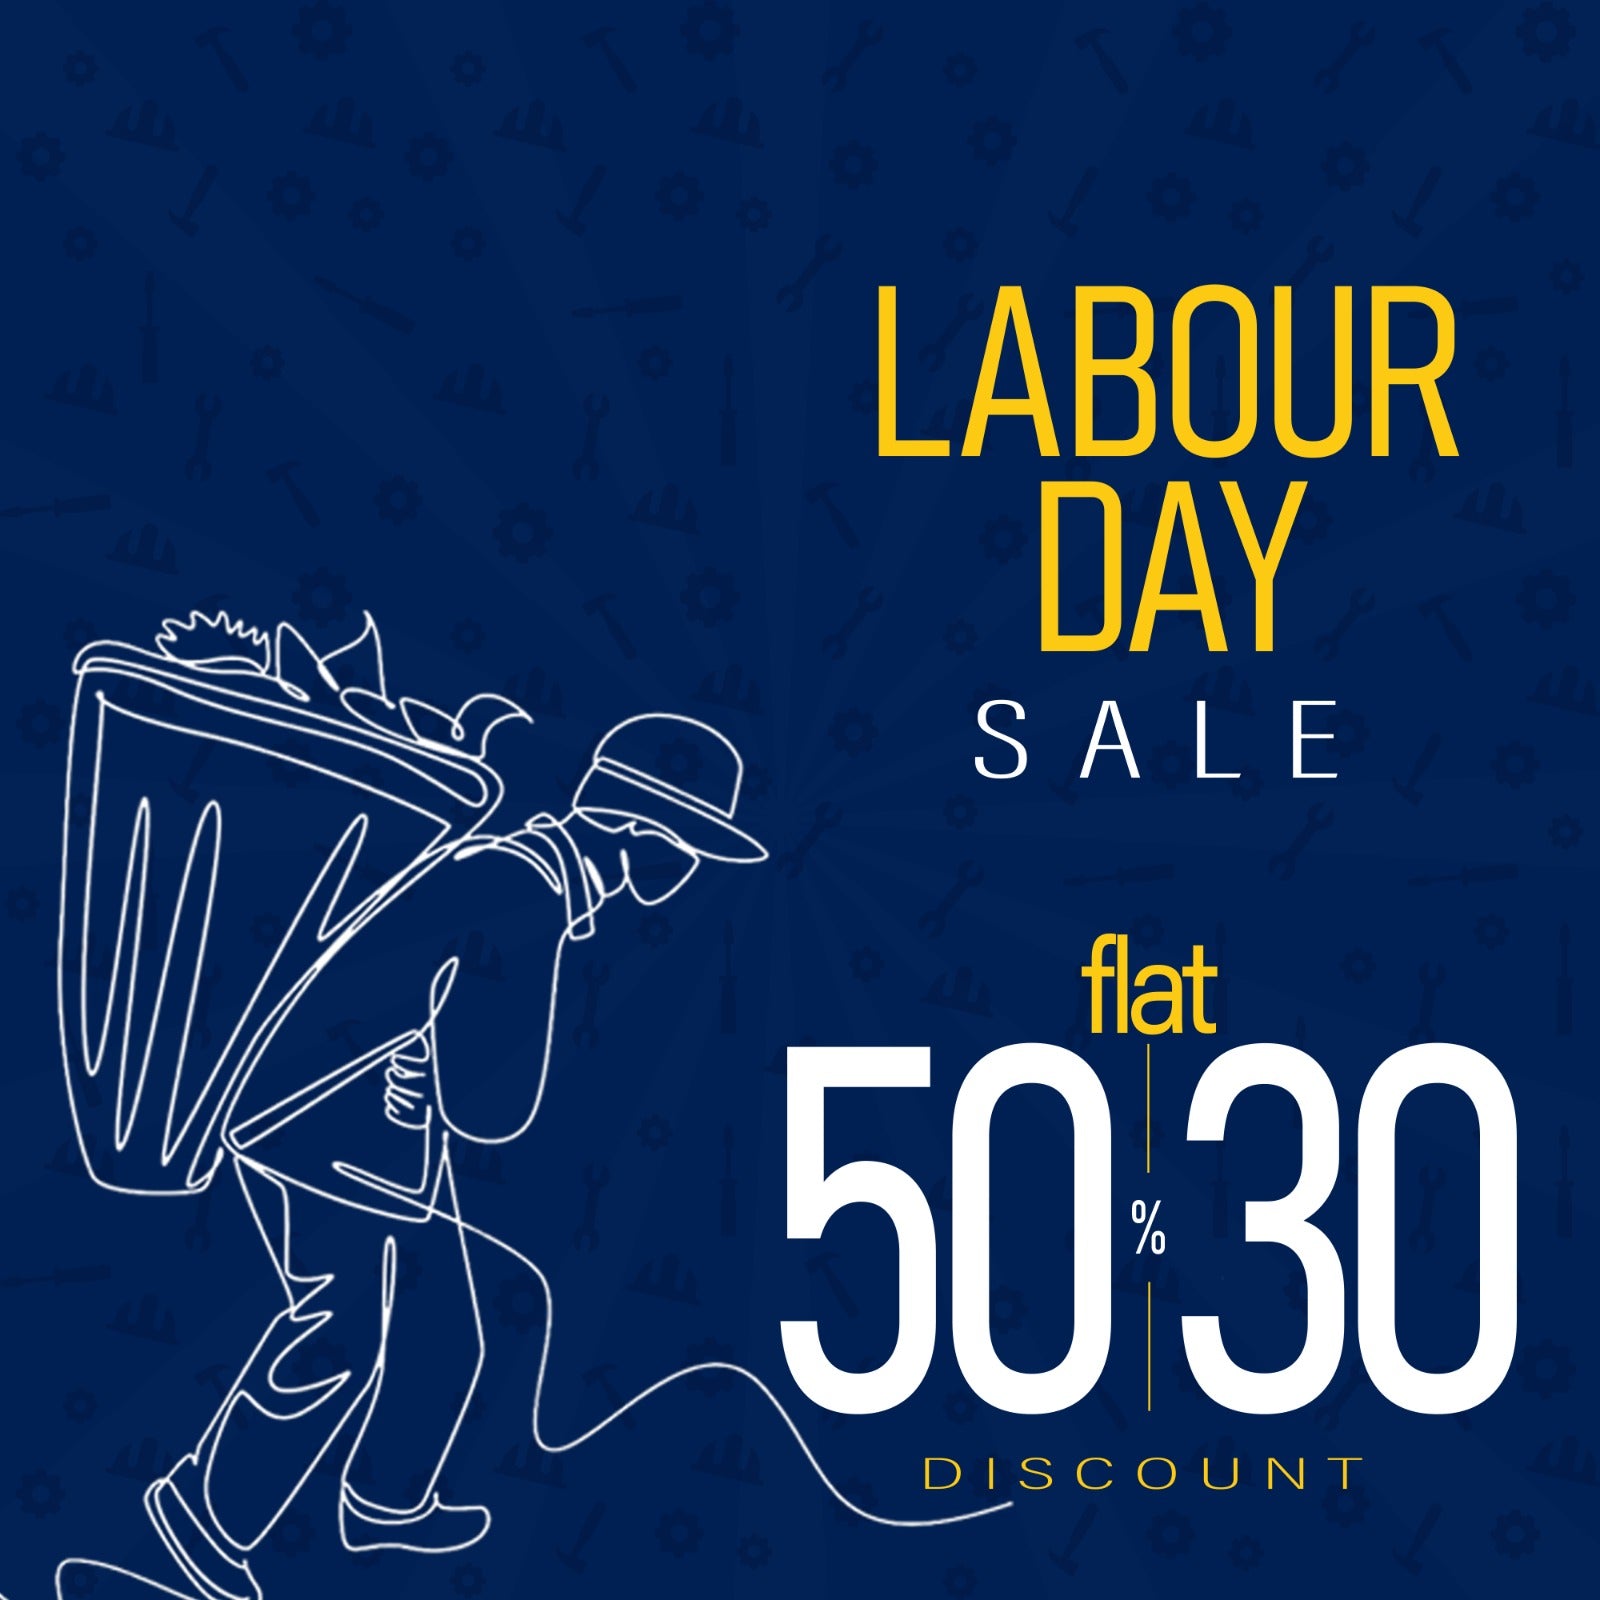 Stone Harbor Labour Day Sale Flat 50% & 30% OFF Sitewide